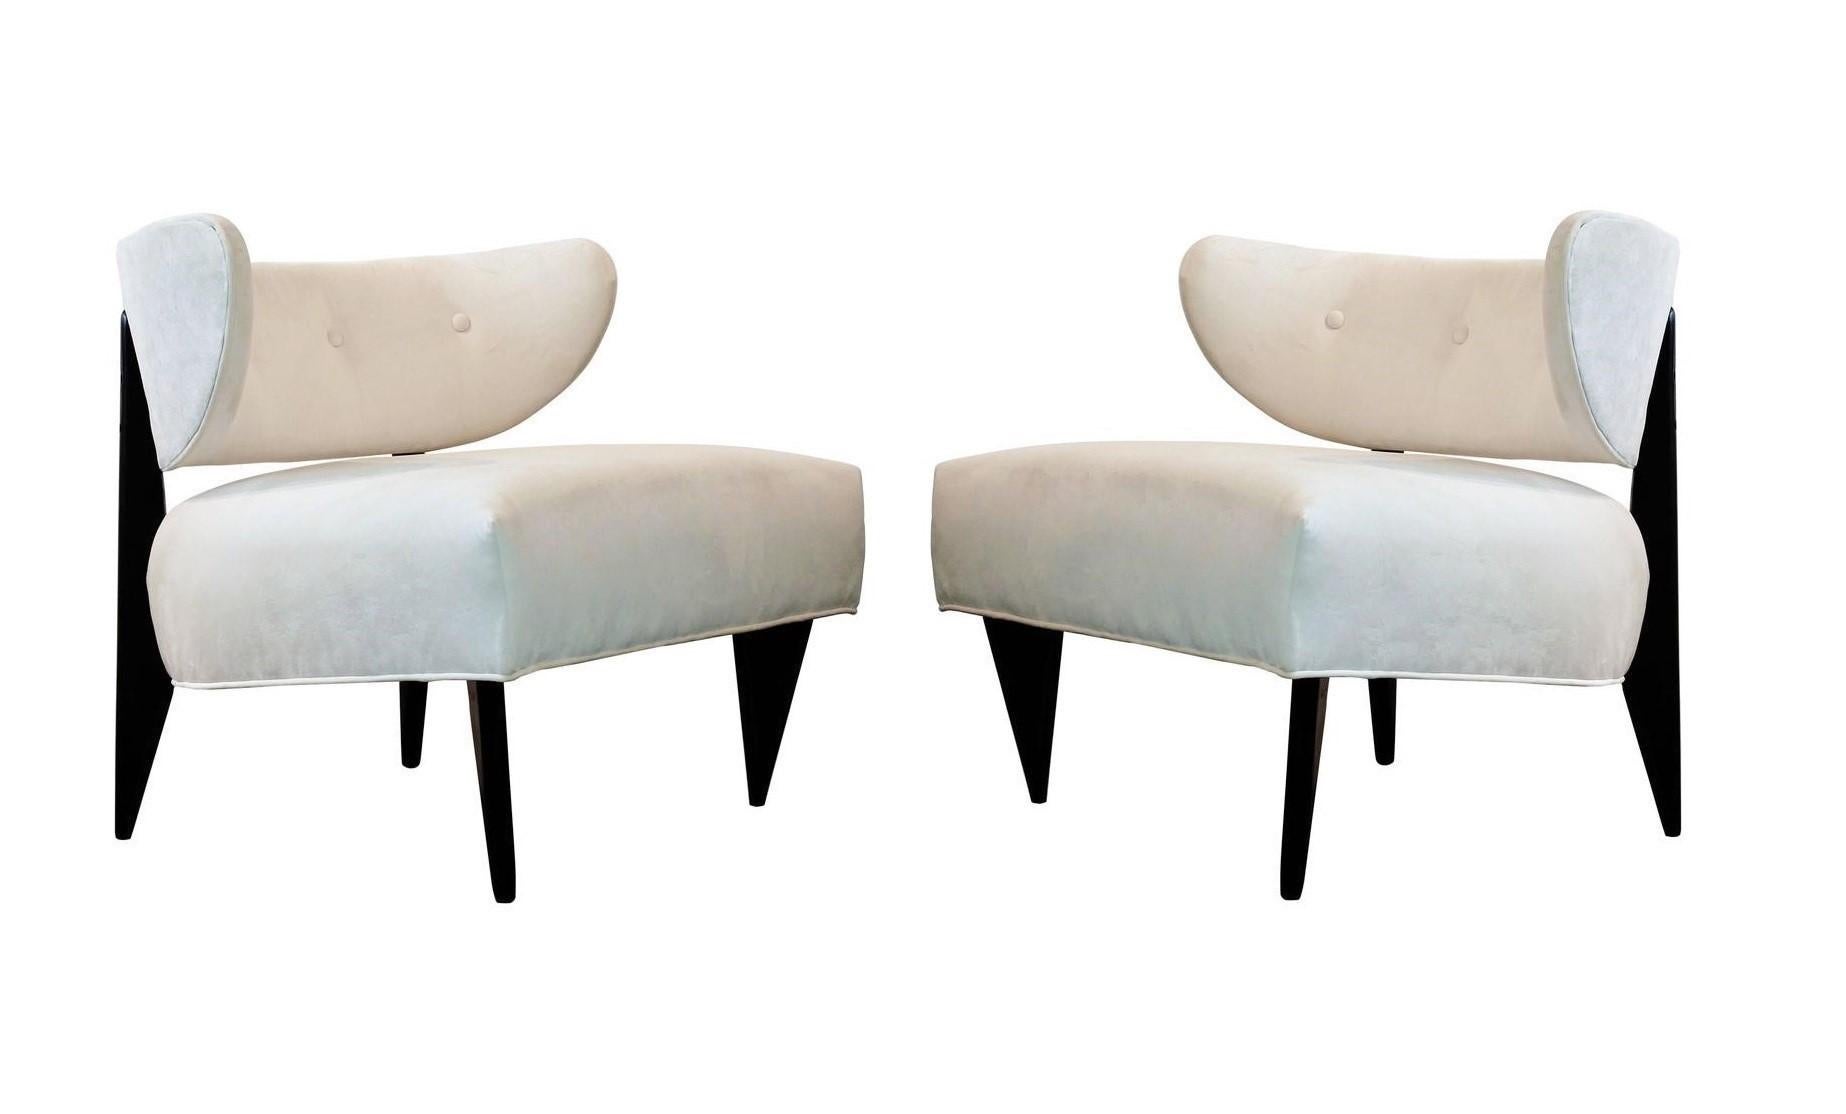 Offered is a stunning pair of Art Deco club / lounge chairs, circa 1950's. Visually captivating from every angle with their sensual curves and distinctive sharp tapered legs. Restored to mint condition. Highly sculptural frames with beautiful button